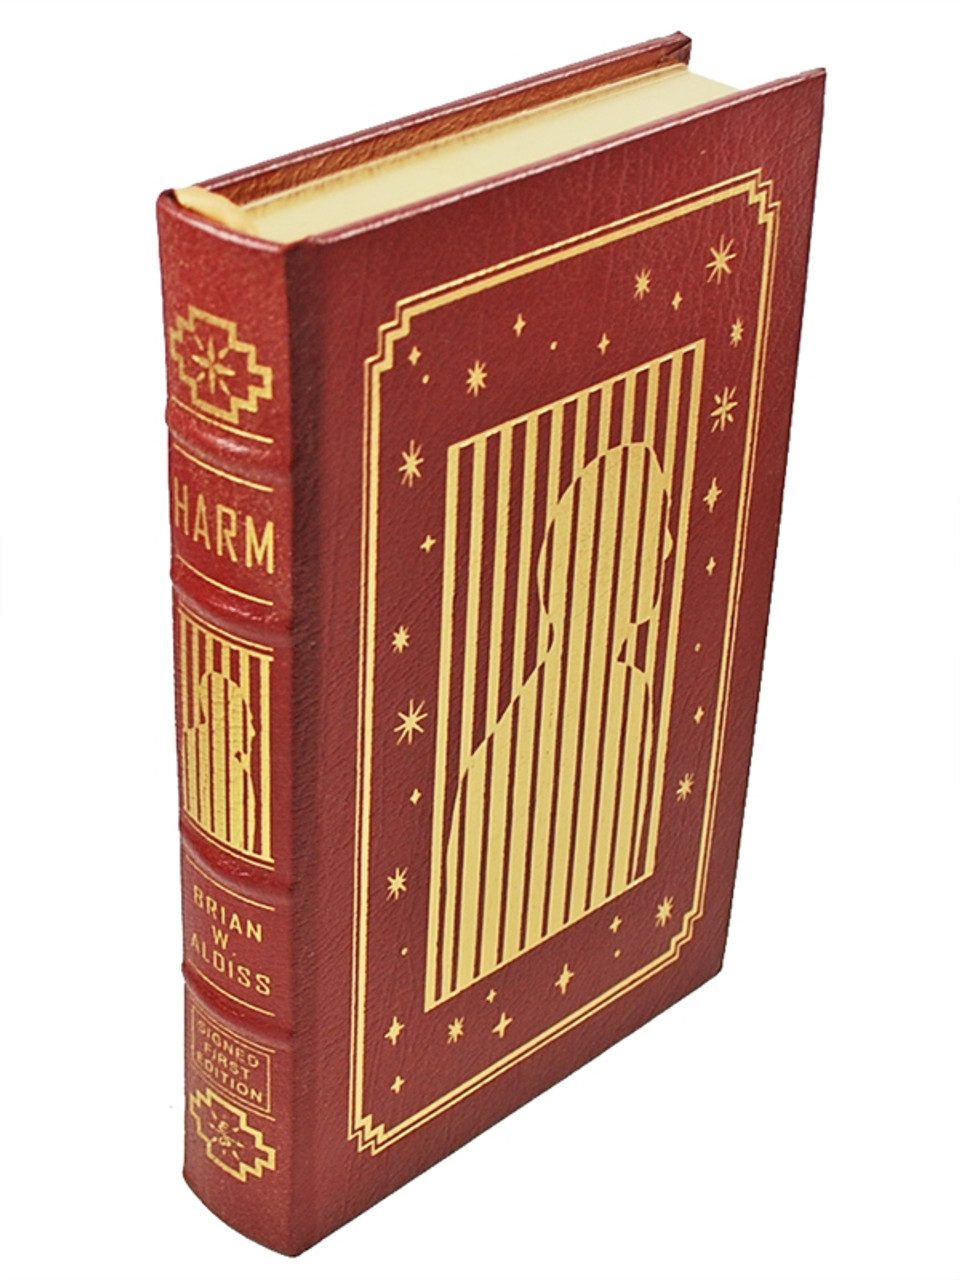 Easton Press, Brian W. Aldiss  "Harm" Signed First Edition, Leather Bound Collector's Edition